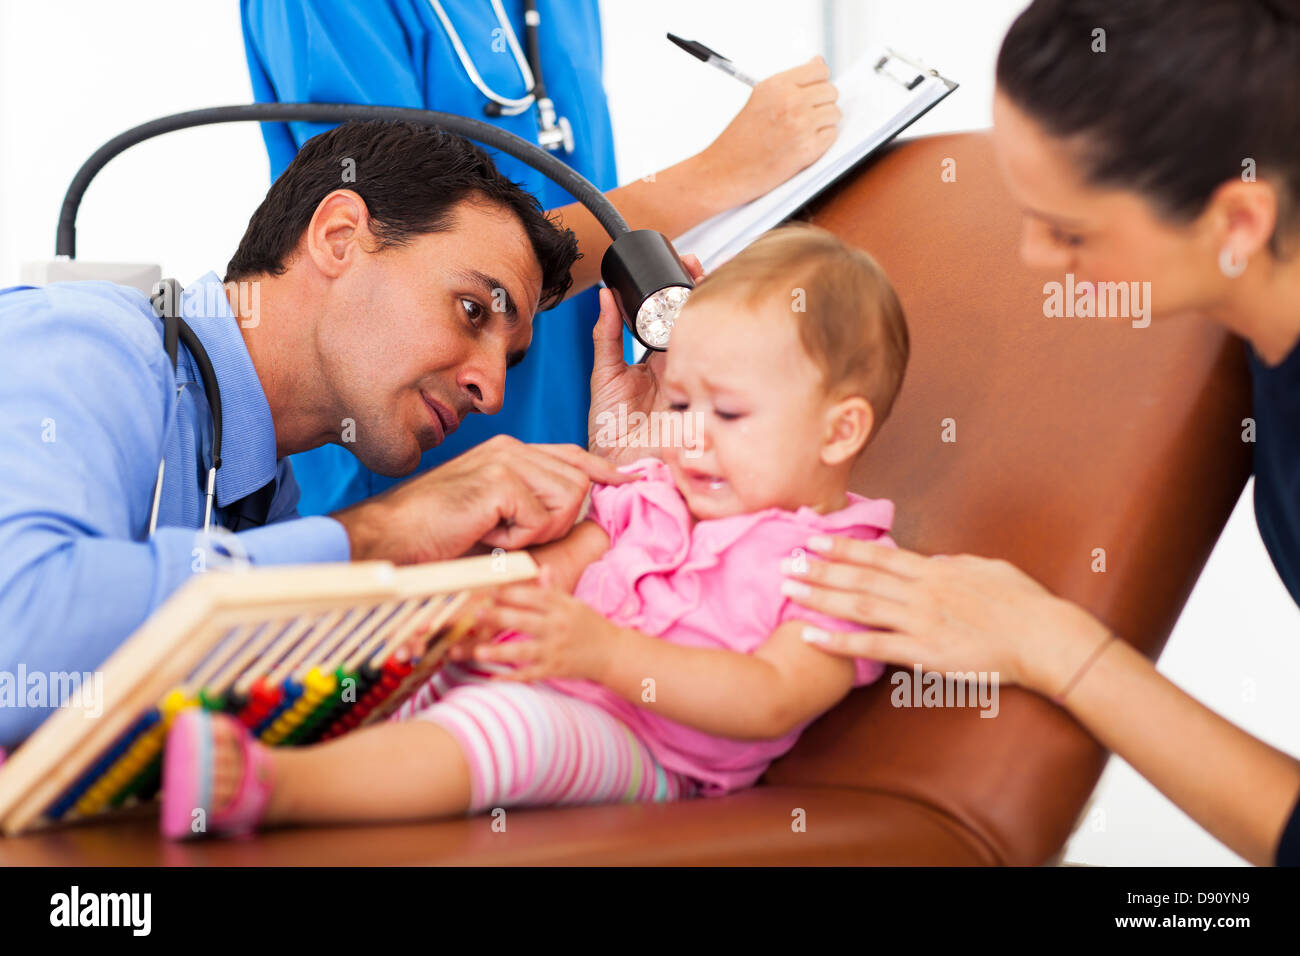 peadiatric doctor examining a sick baby's ear in office Stock Photo